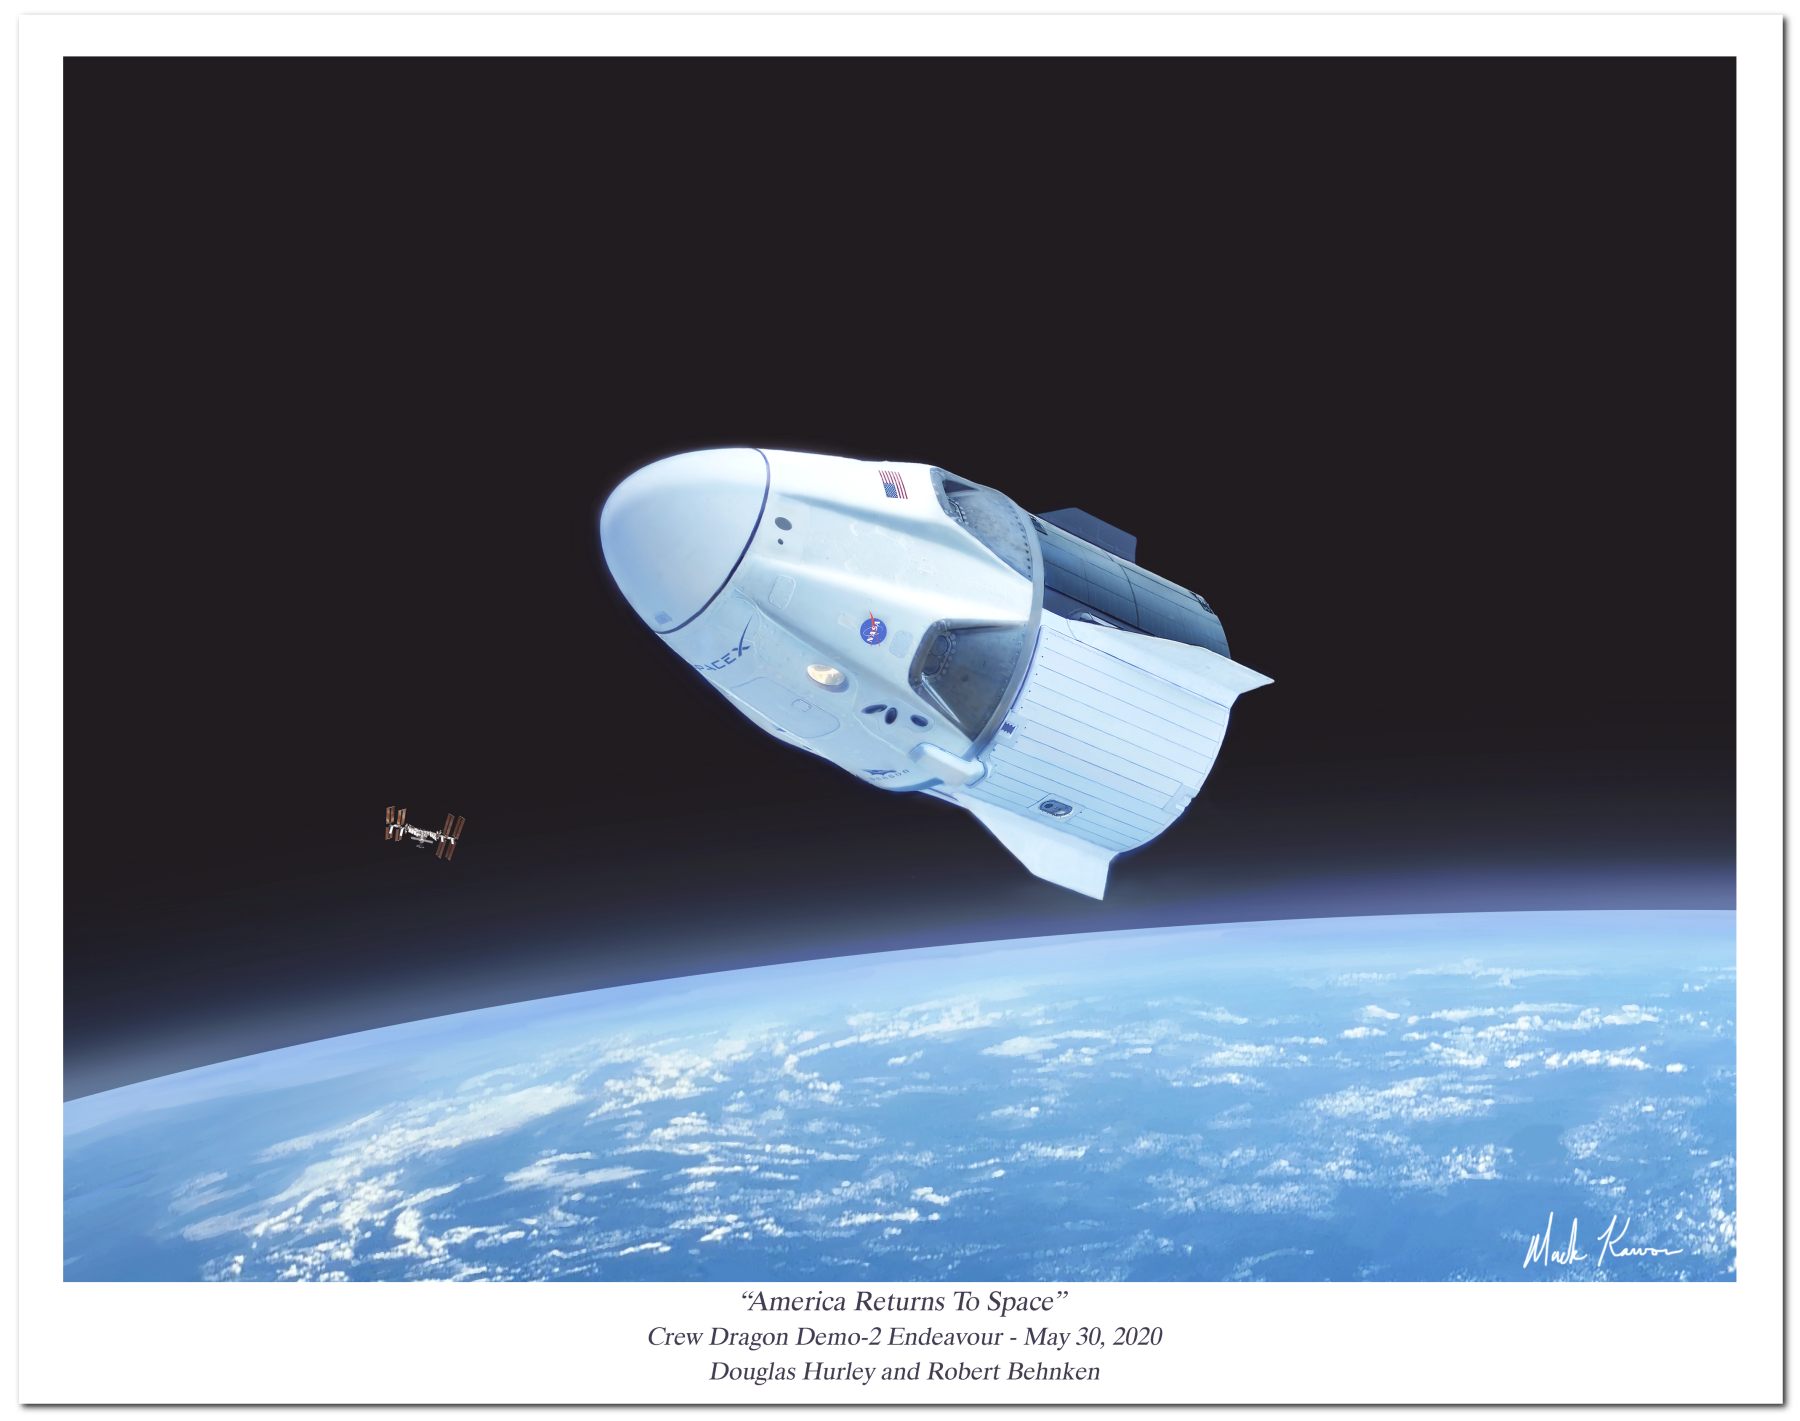 "America Returns to Space" by Mark Karvon featuring the SpaceX Crew Dragon 2 Demo-2 Endeavour